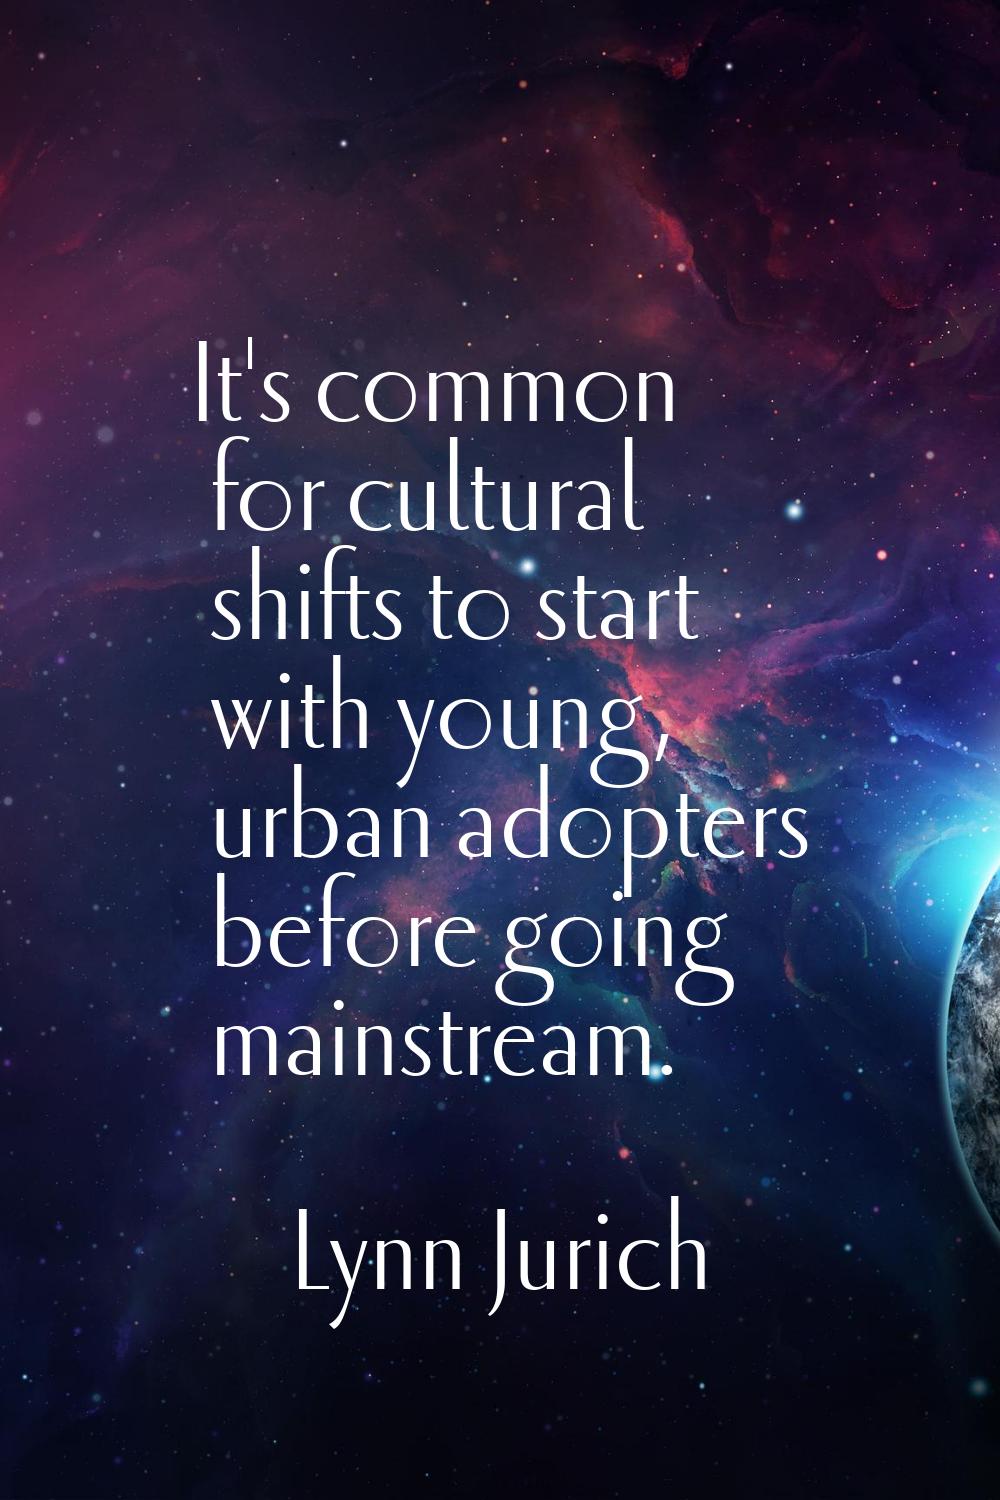 It's common for cultural shifts to start with young, urban adopters before going mainstream.